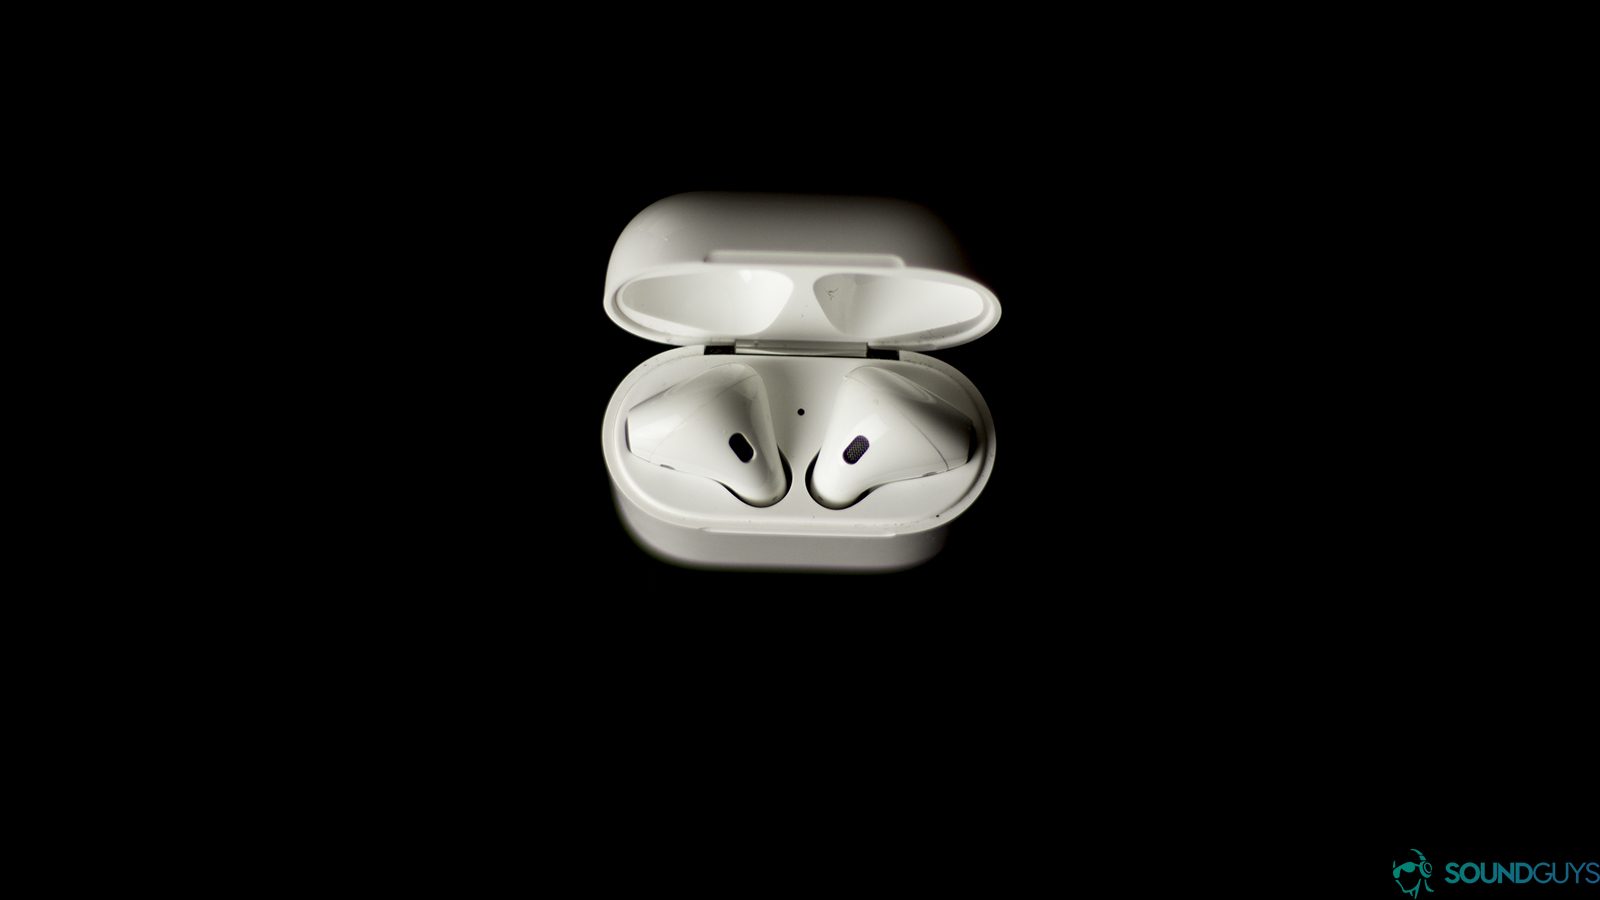 An aerial image of the Apple AirPods (first-gen), which suffice as Apple AirPods Pro alternatives.